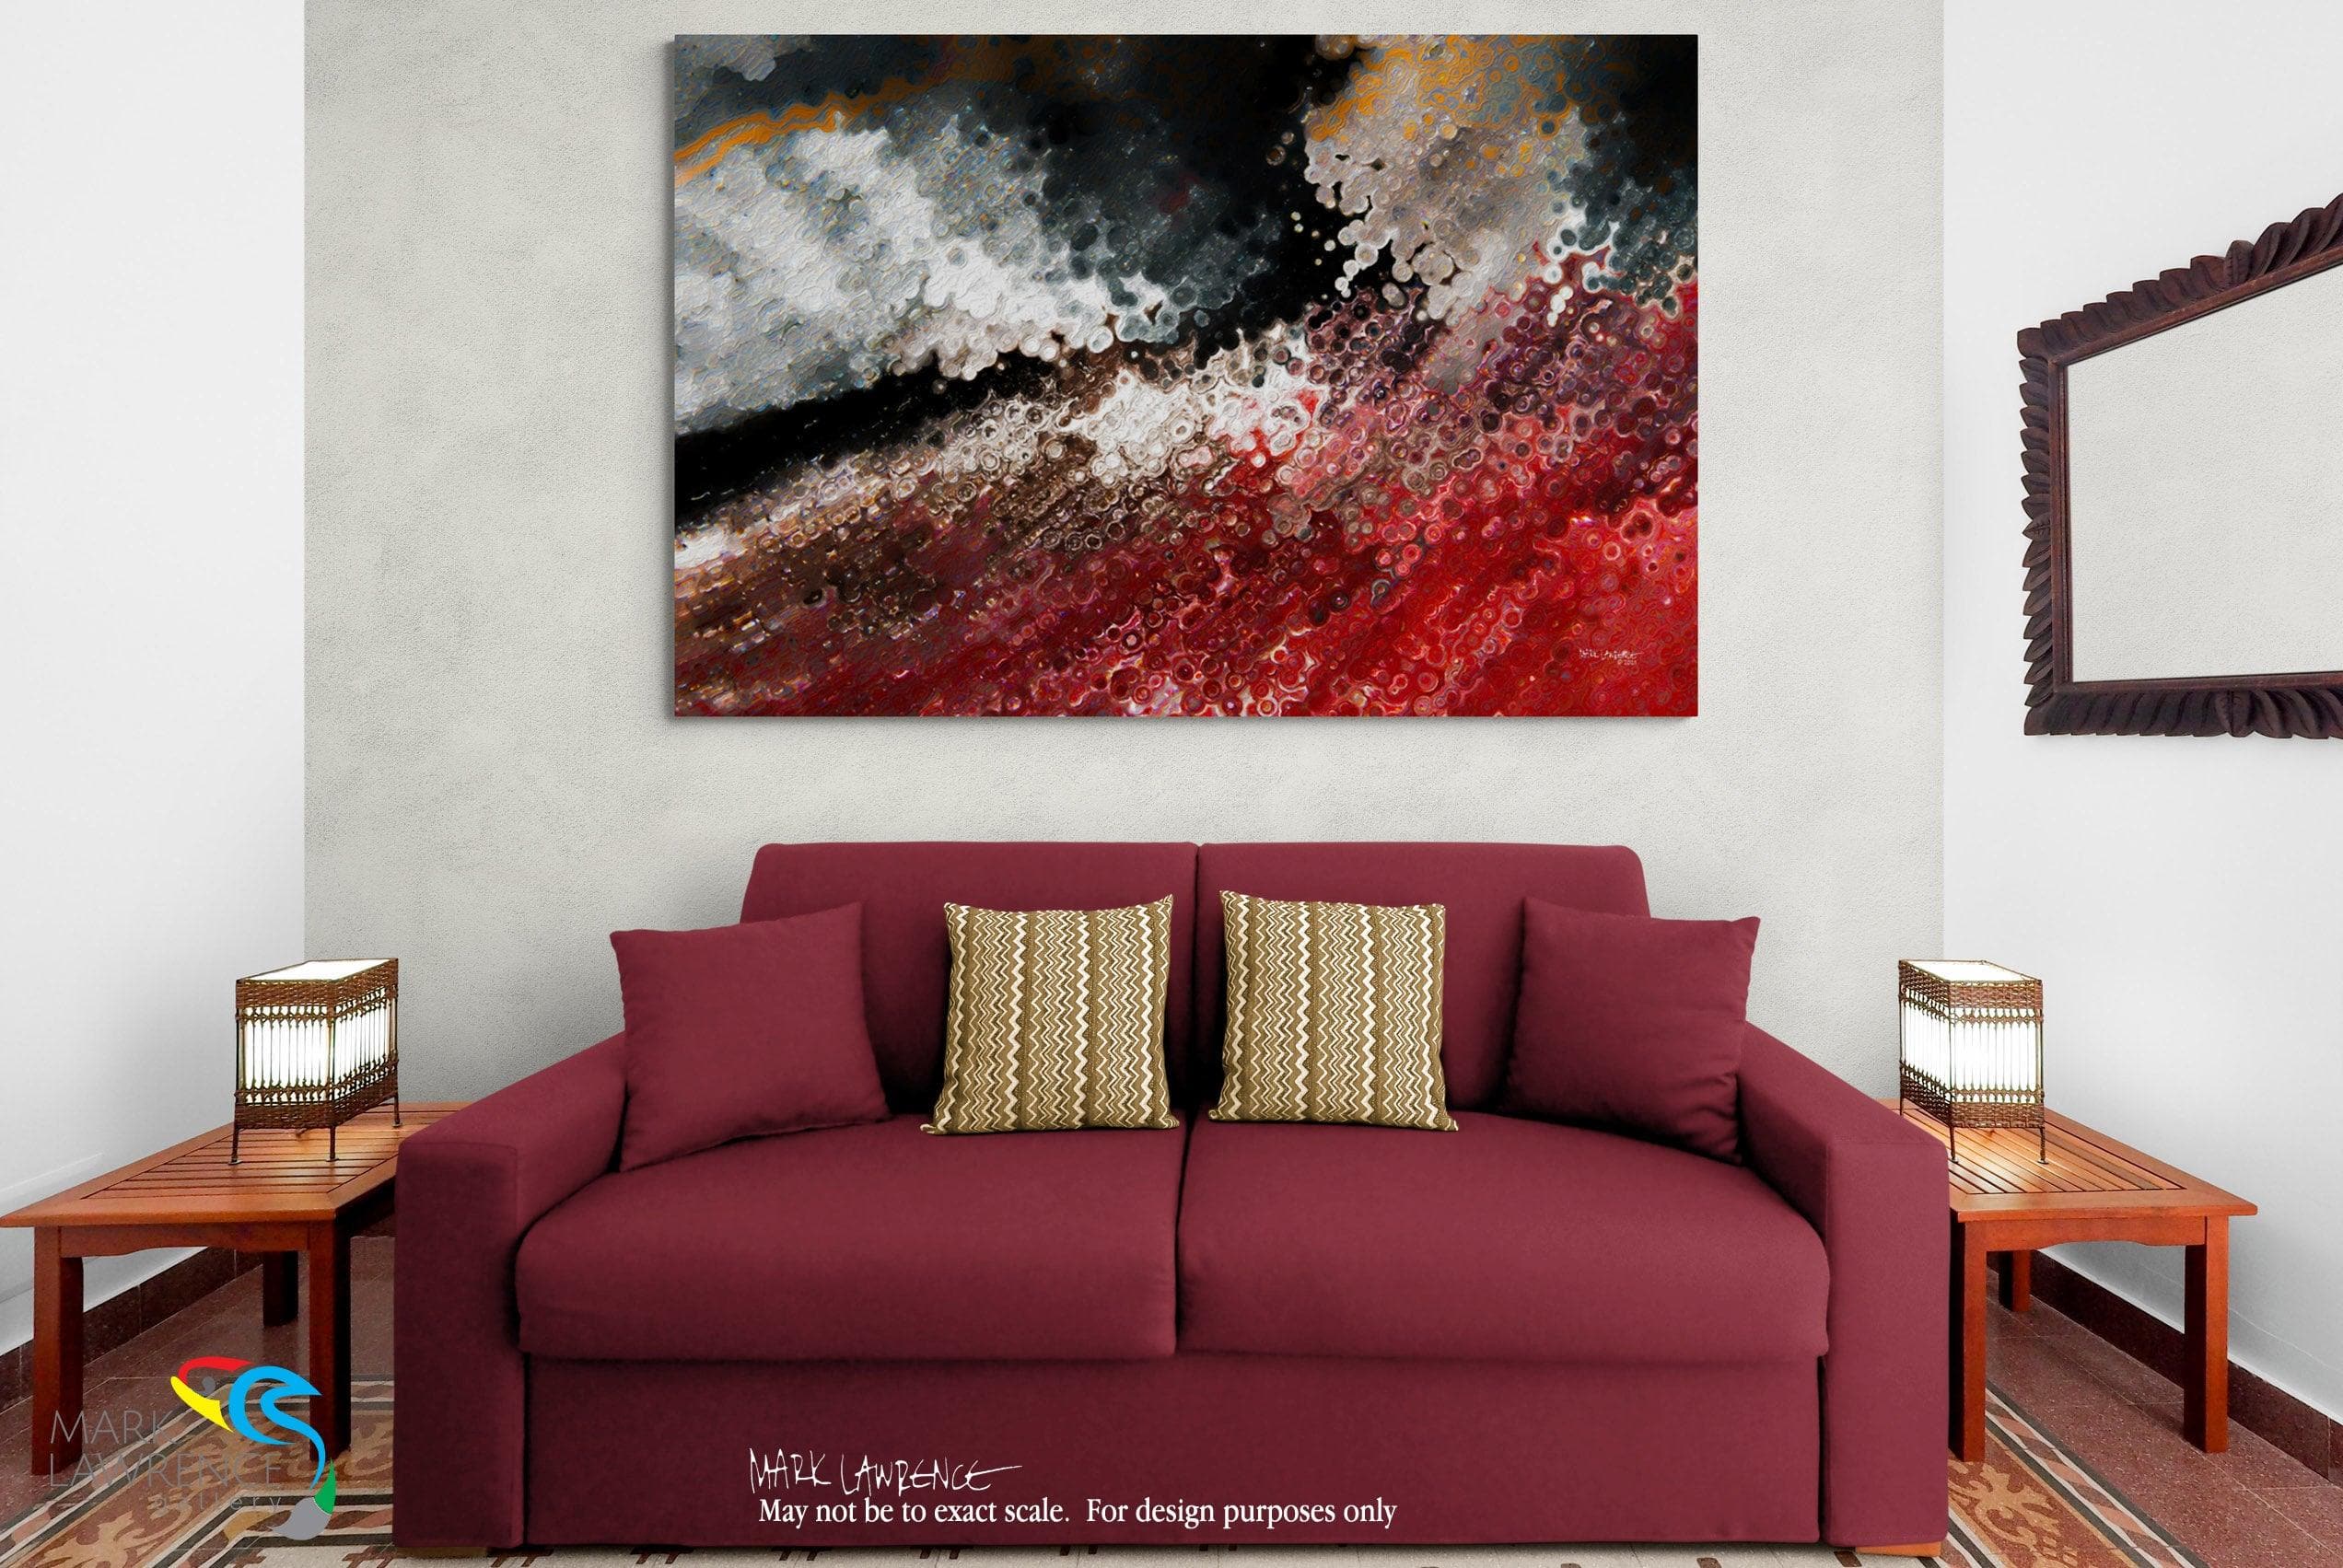 Interior Design Inspiration. Matthew 28:20. Jesus Always With Us. Limited Edition Christian Modern Art. Ultra-hand embellished and textured with rich brush strokes by the artist. Signed & numbered Christian abstract art. Teaching them to observe all things that I have commanded you; and lo, I am with you always, even to the end of the age.